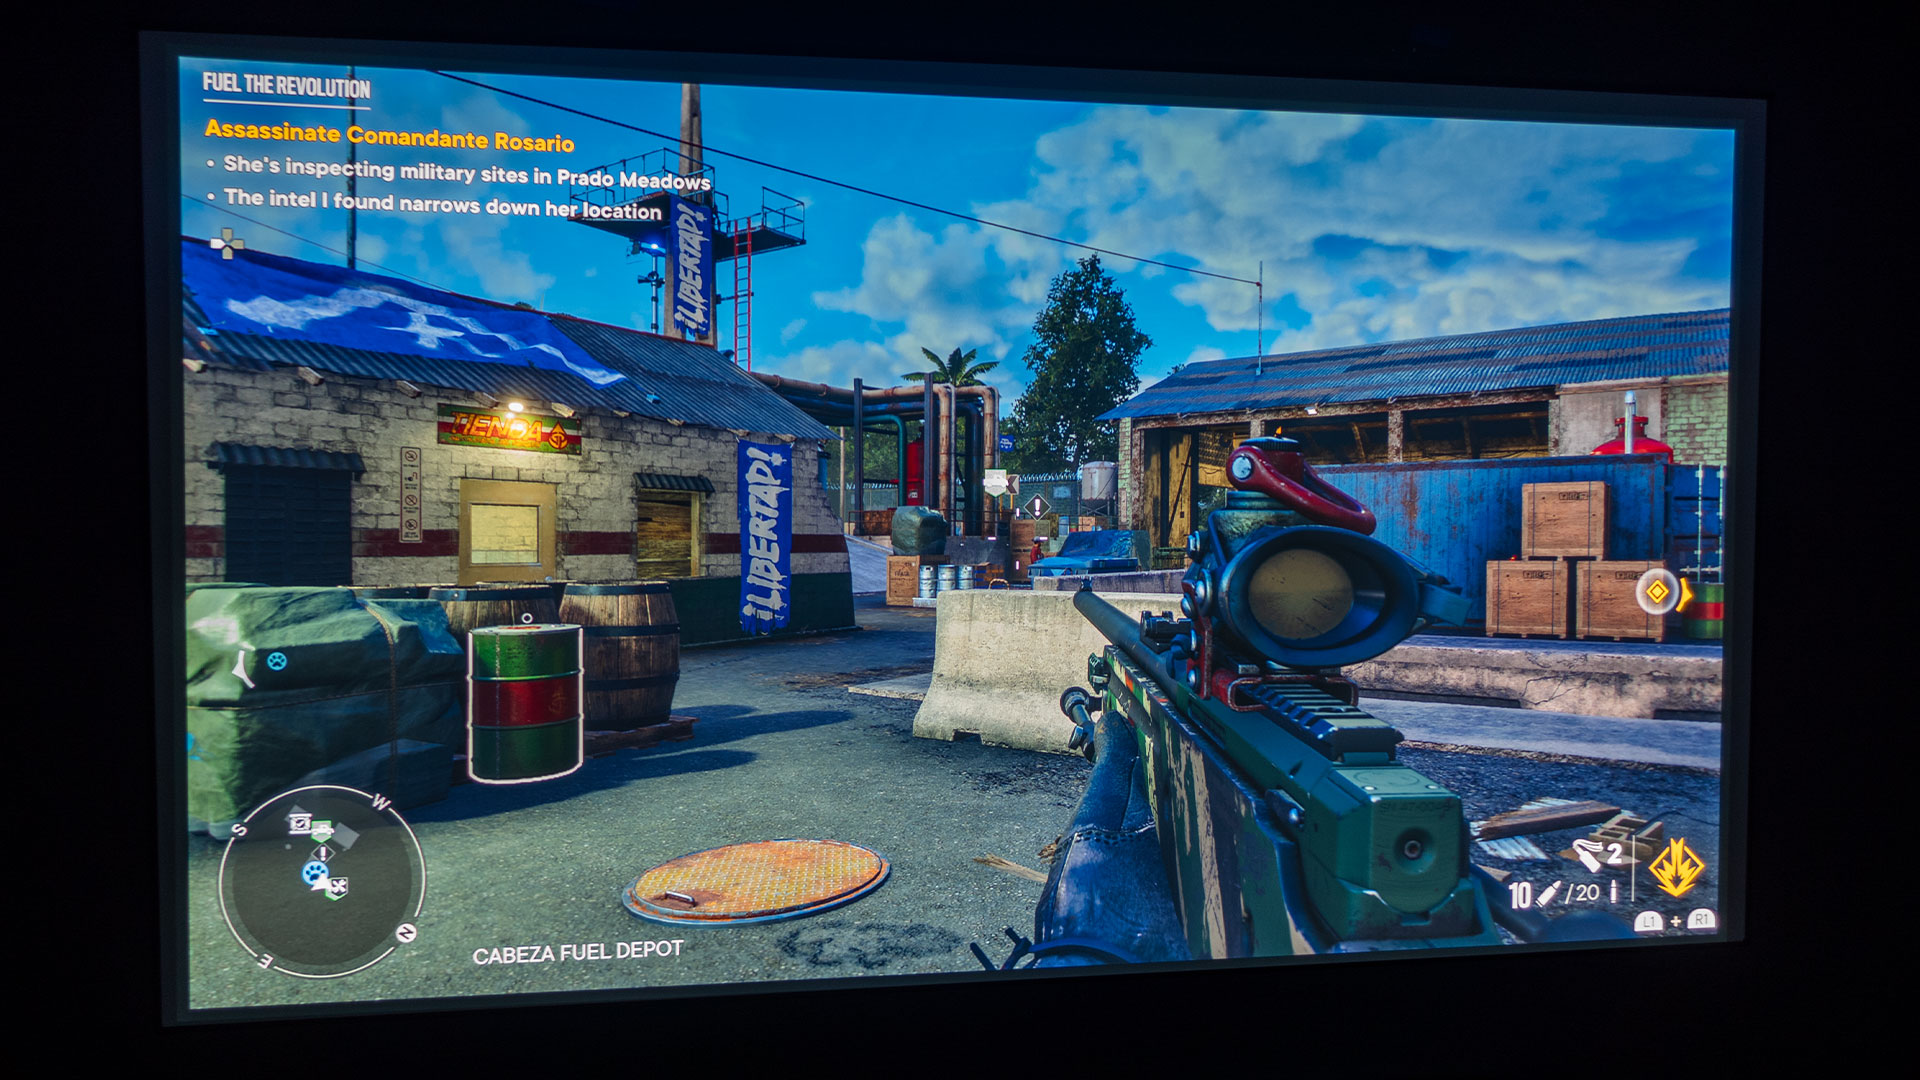 Gaming On A Projector: Review Of Far Cry 6 - Projector Reviews